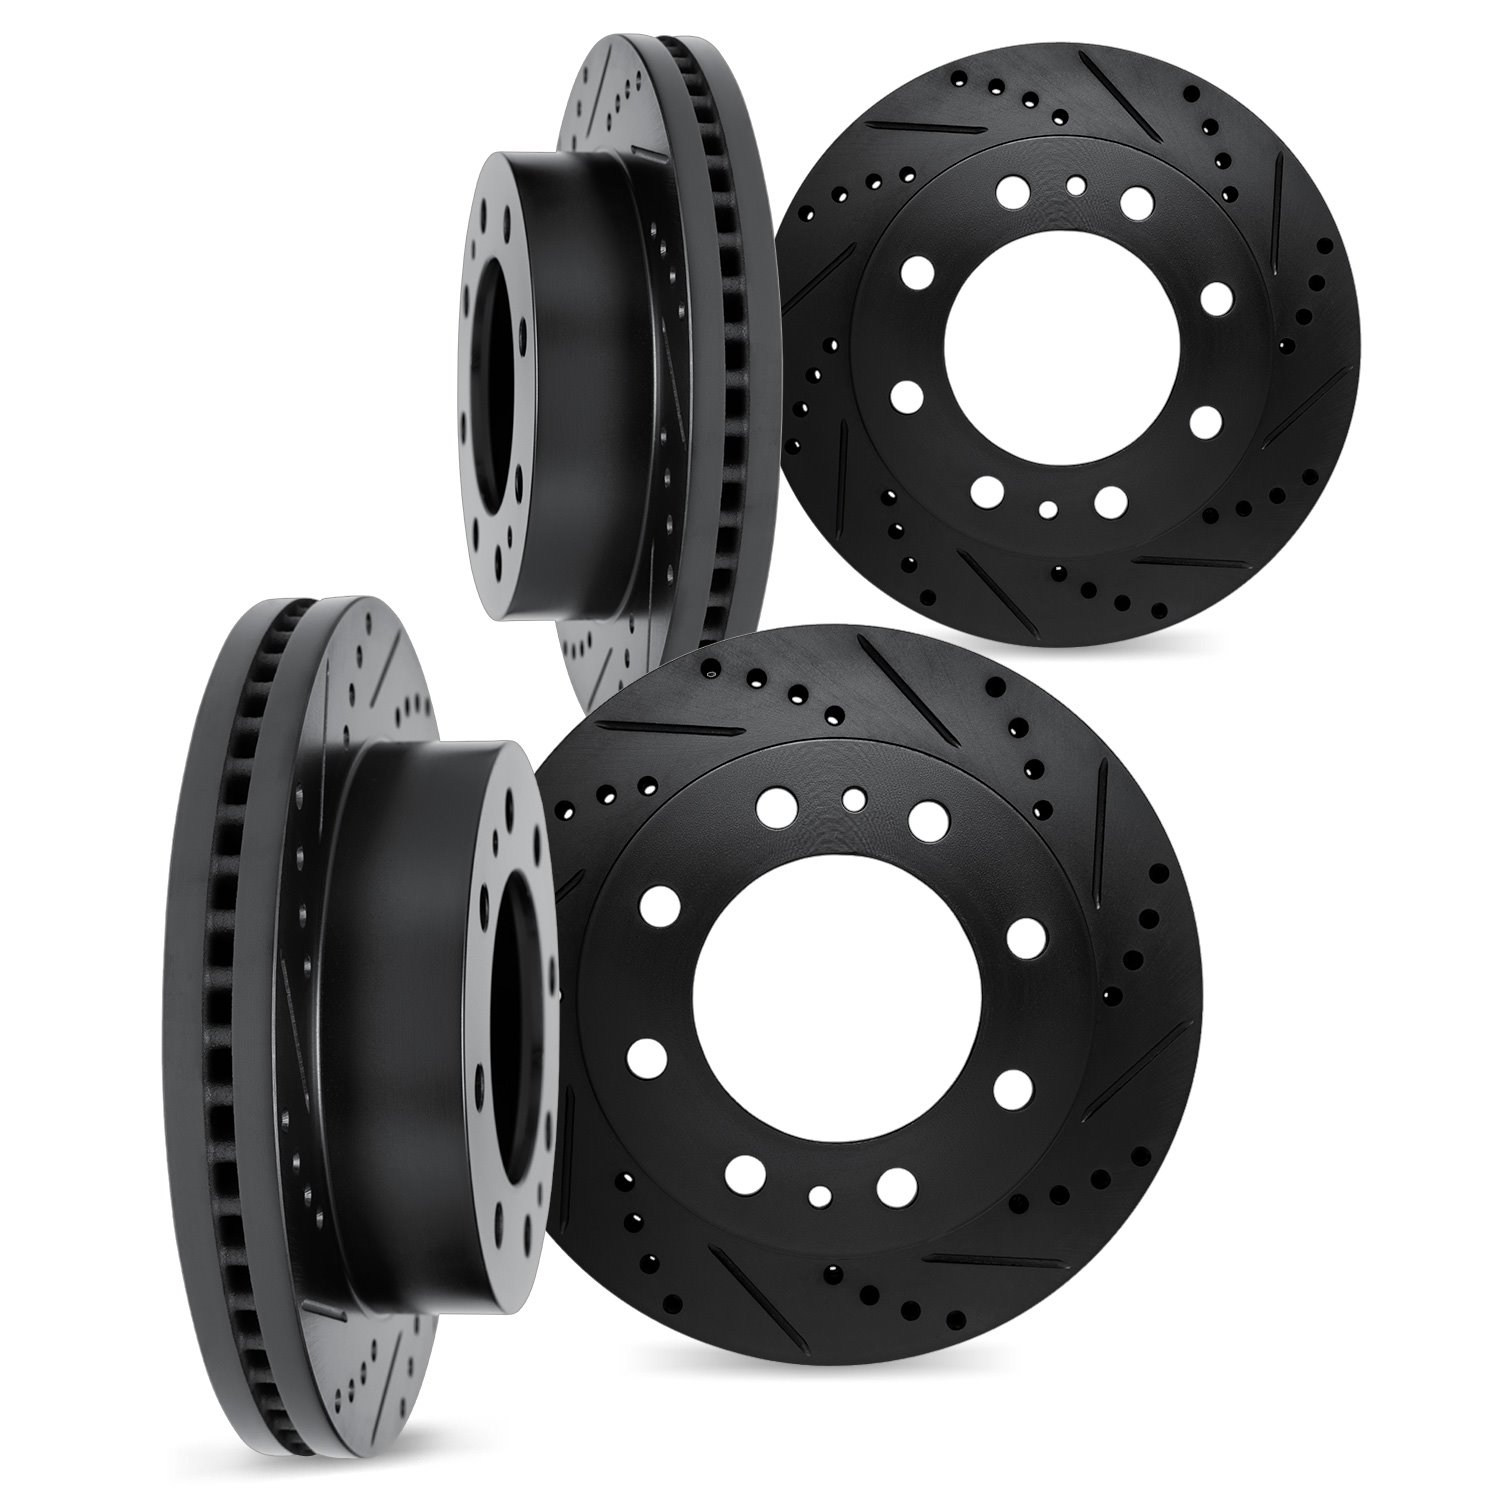 8004-40136 Drilled/Slotted Brake Rotors [Black], Fits Select Mopar, Position: Front and Rear